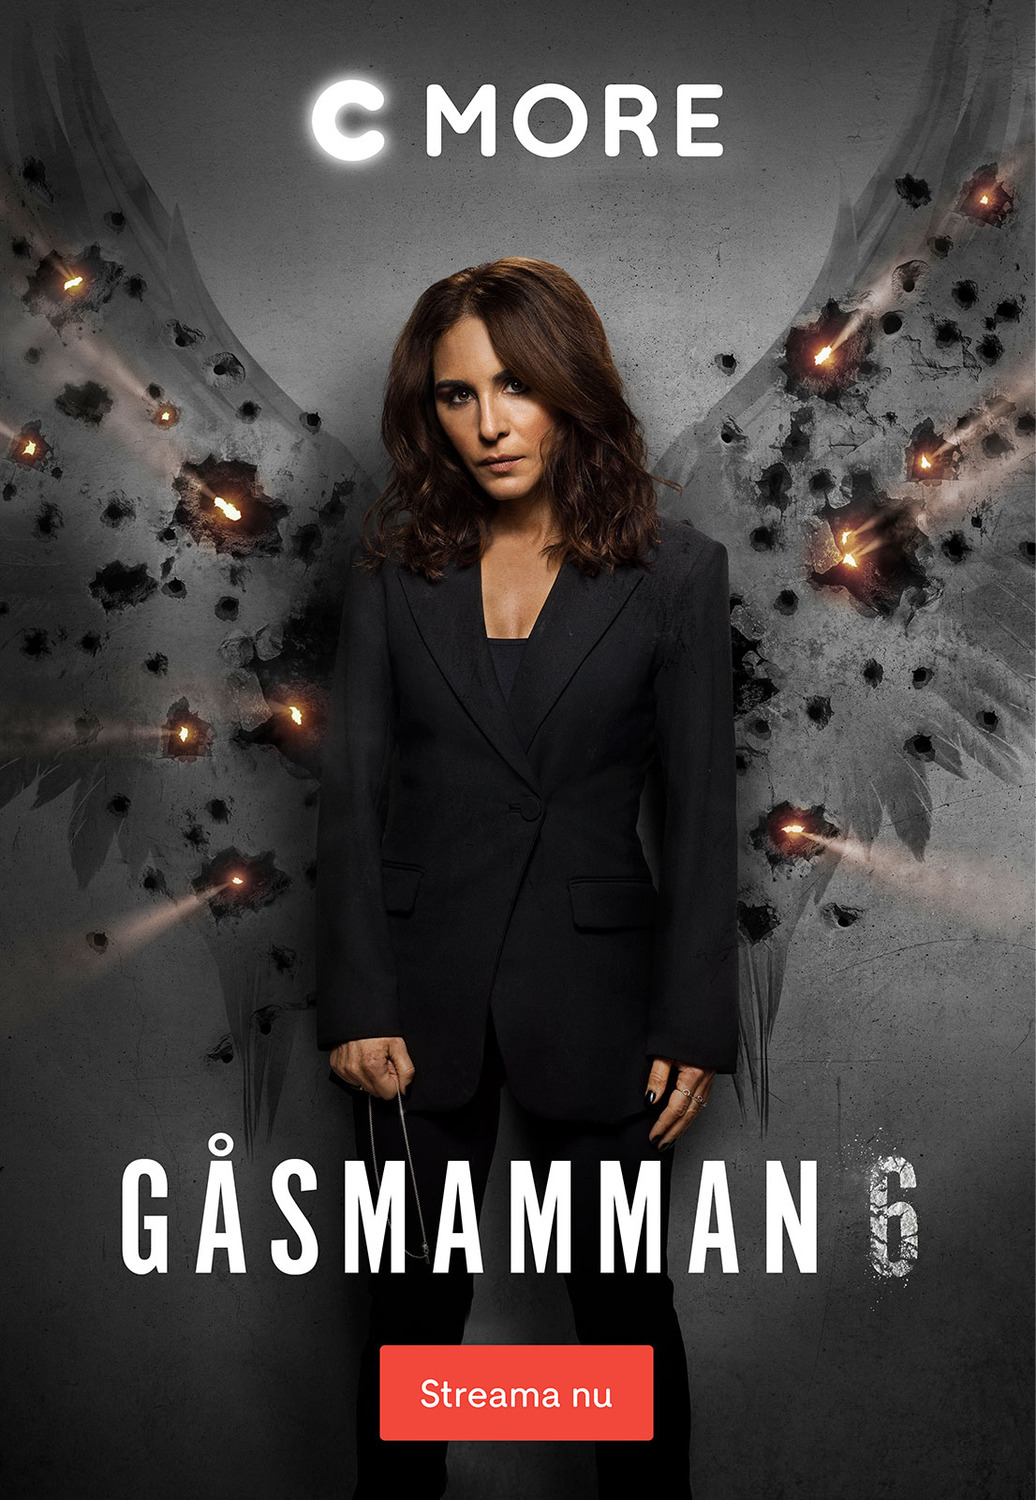 Extra Large TV Poster Image for Gåsmamman (#3 of 3)